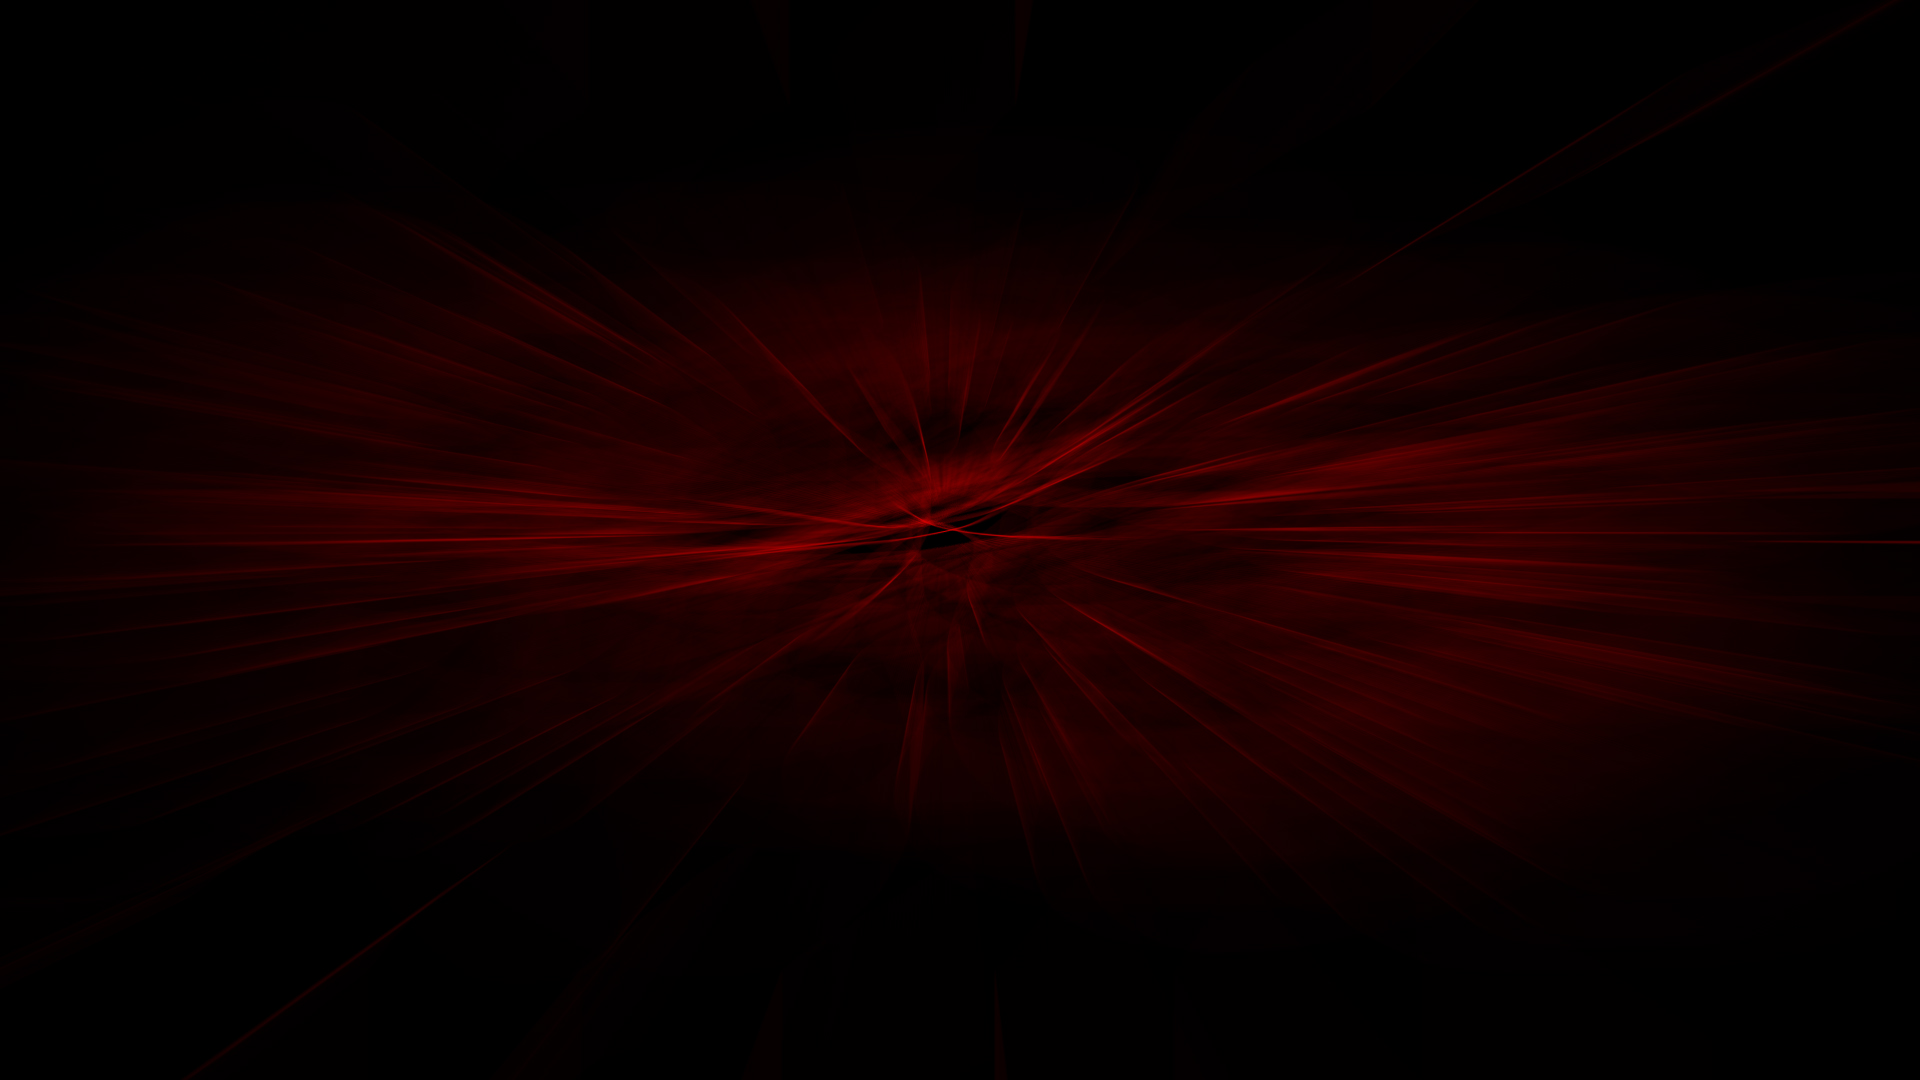 Black and red abstract wallpaper - SF Wallpaper